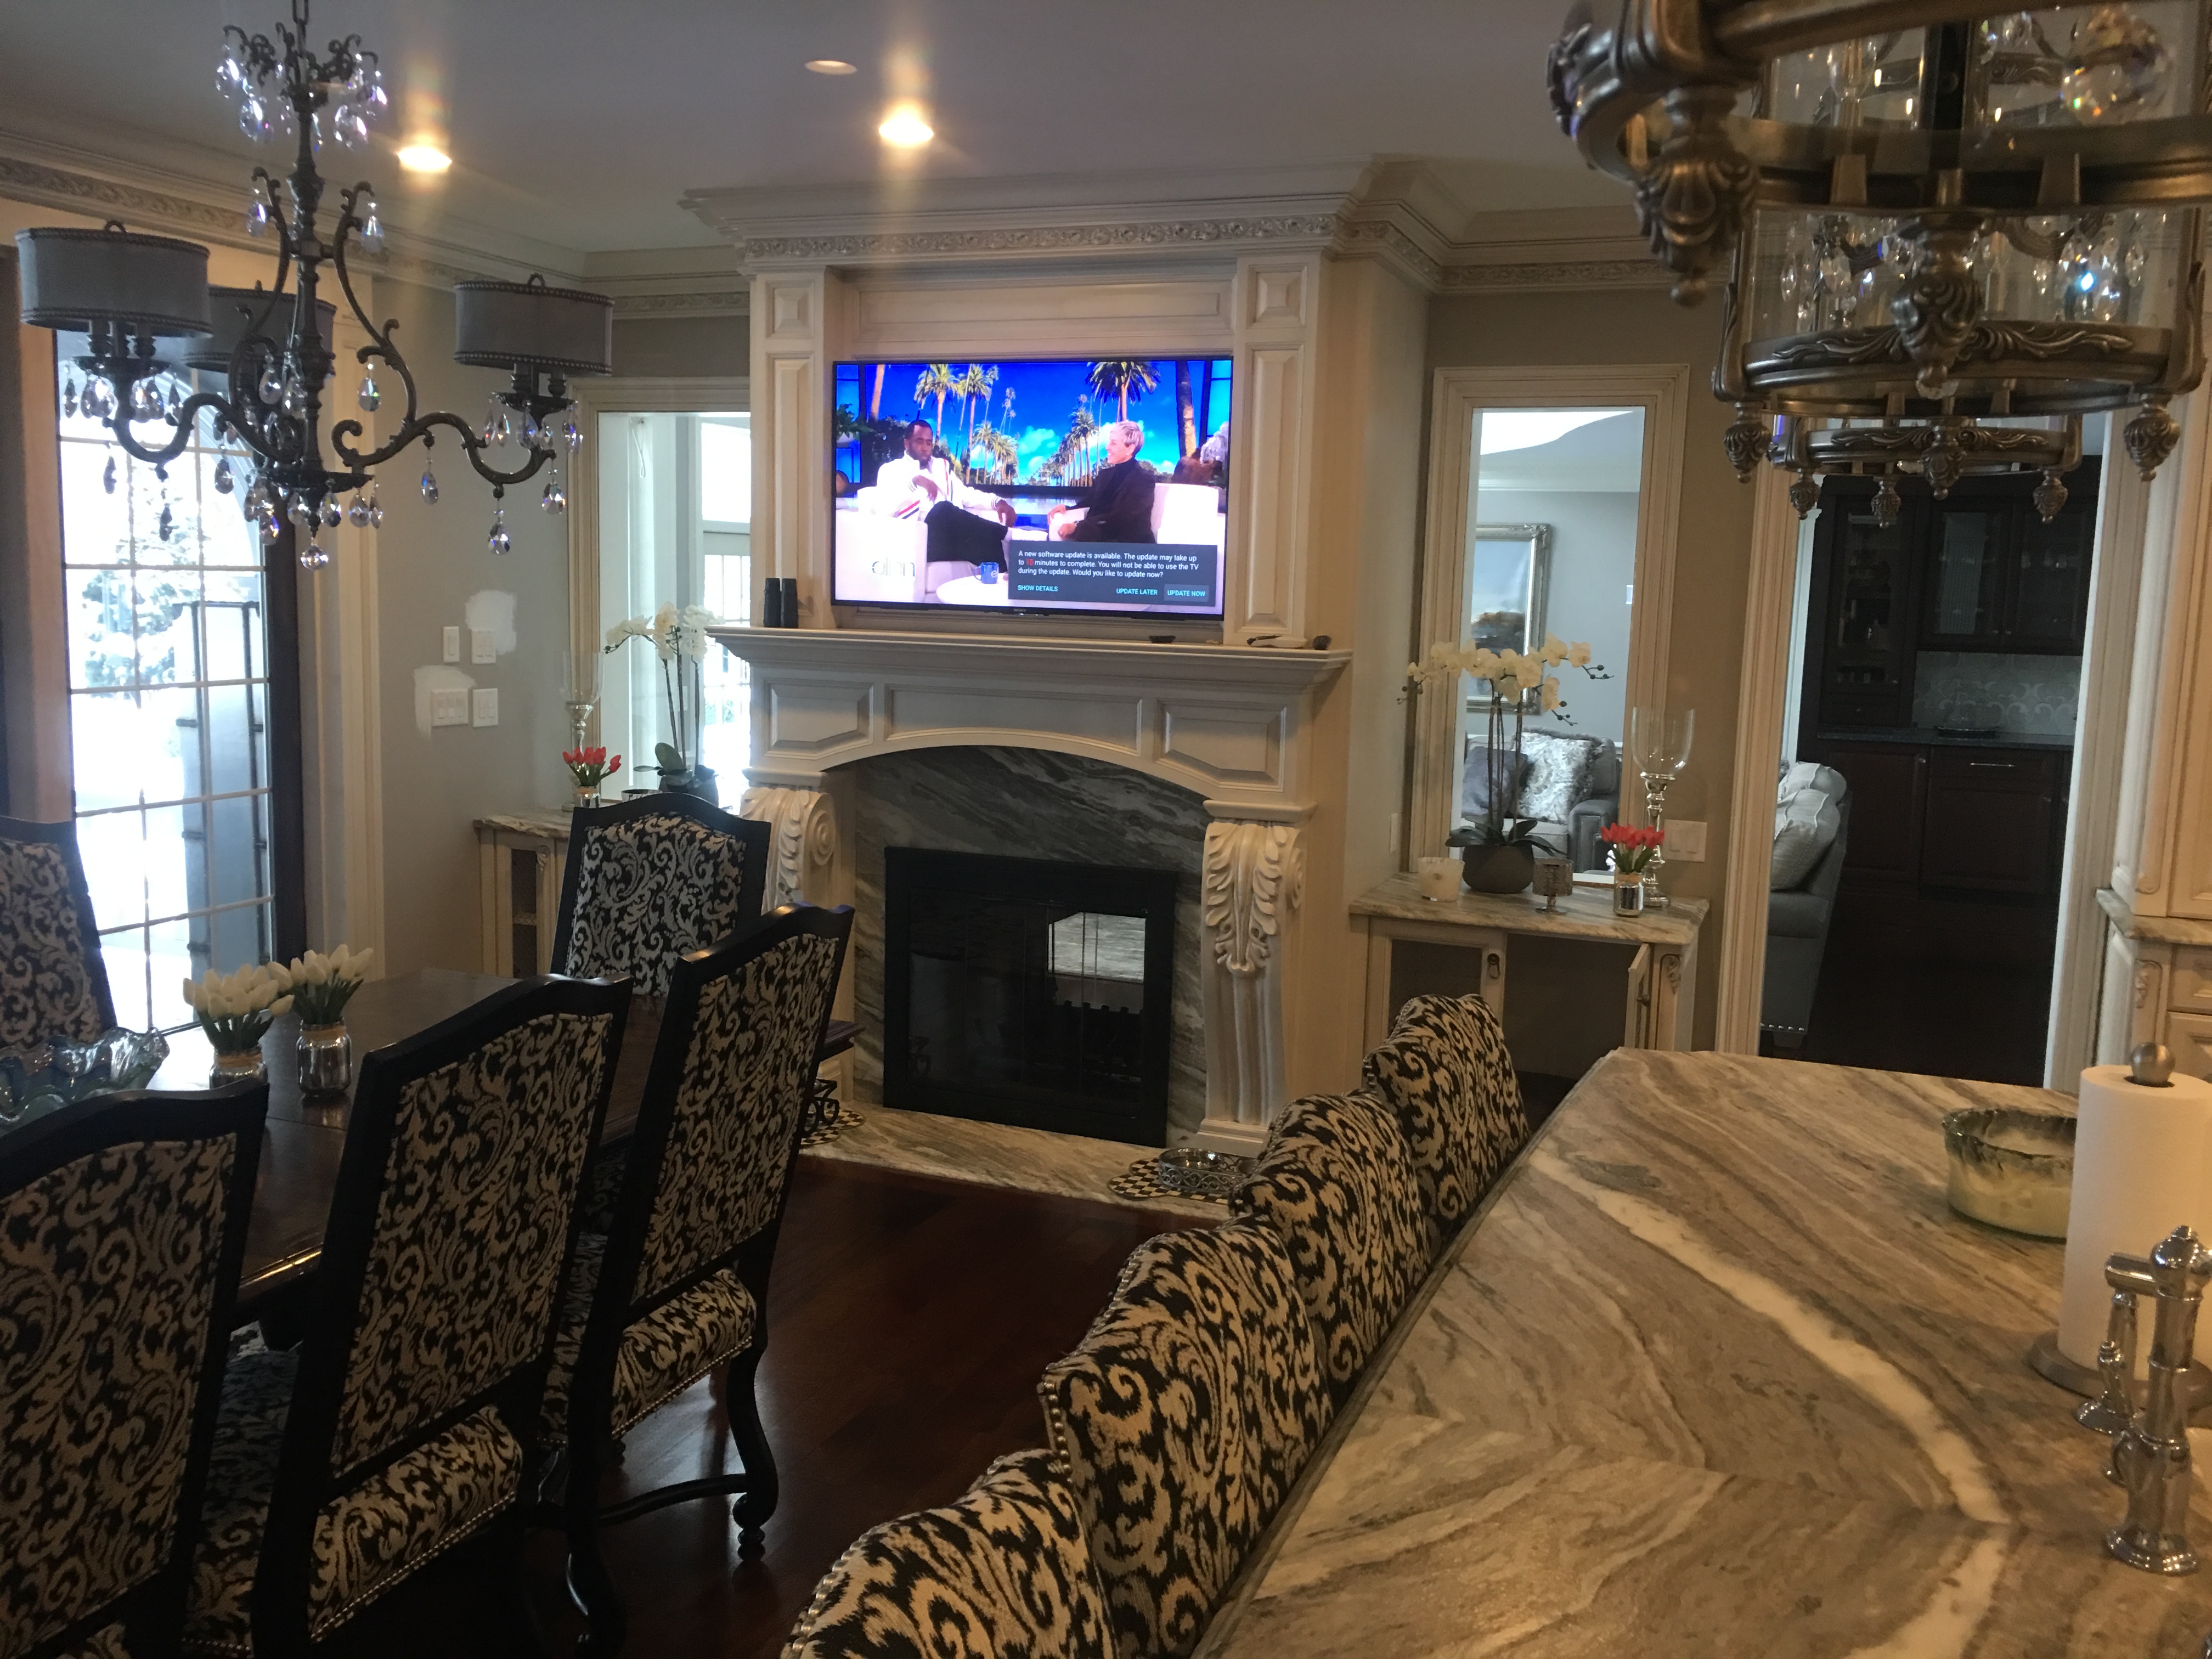 Custom Painted Kitchen - with french blue china hutch, granite countertops, light soffit, crystal chandeliers , wood bar, storage, refrigerator door